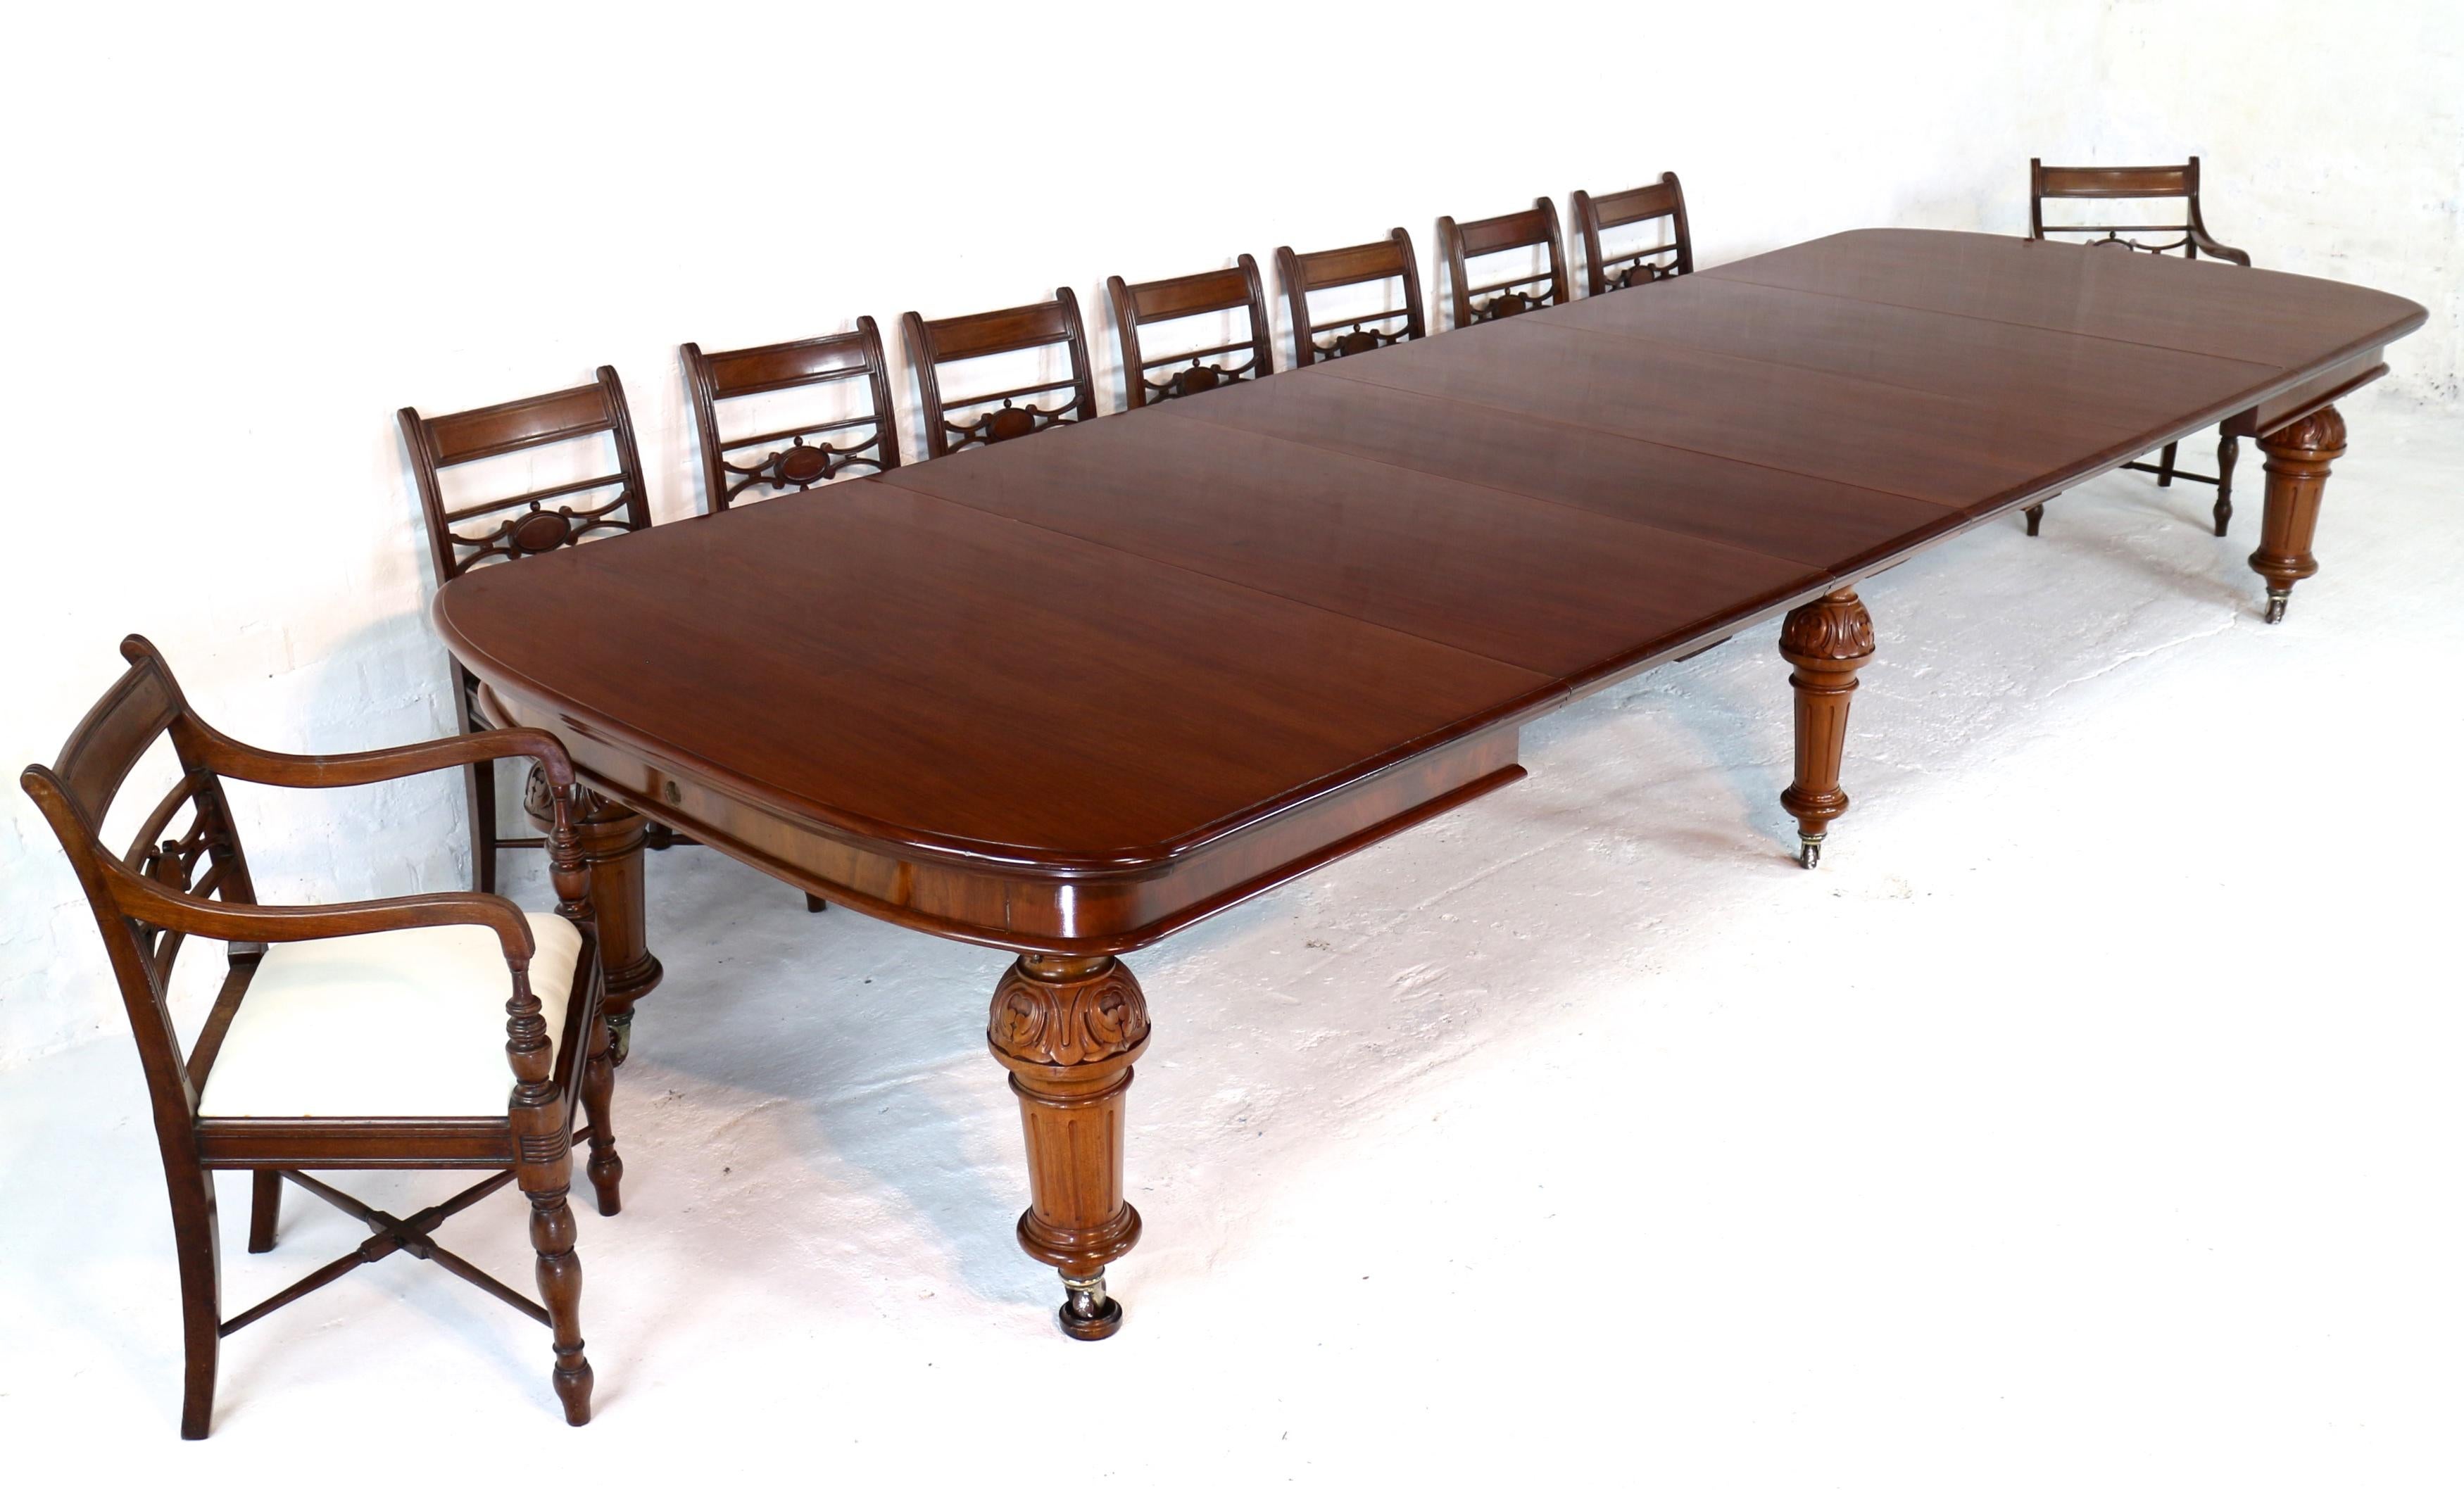 A super quality antique Victorian mahogany wind-out extending dining table with four additional leaves and standing on six substantial legs. This large 4ft9 wide table smoothly extends from 6ft to 13ft 8in by means of a double ‘screw expander’